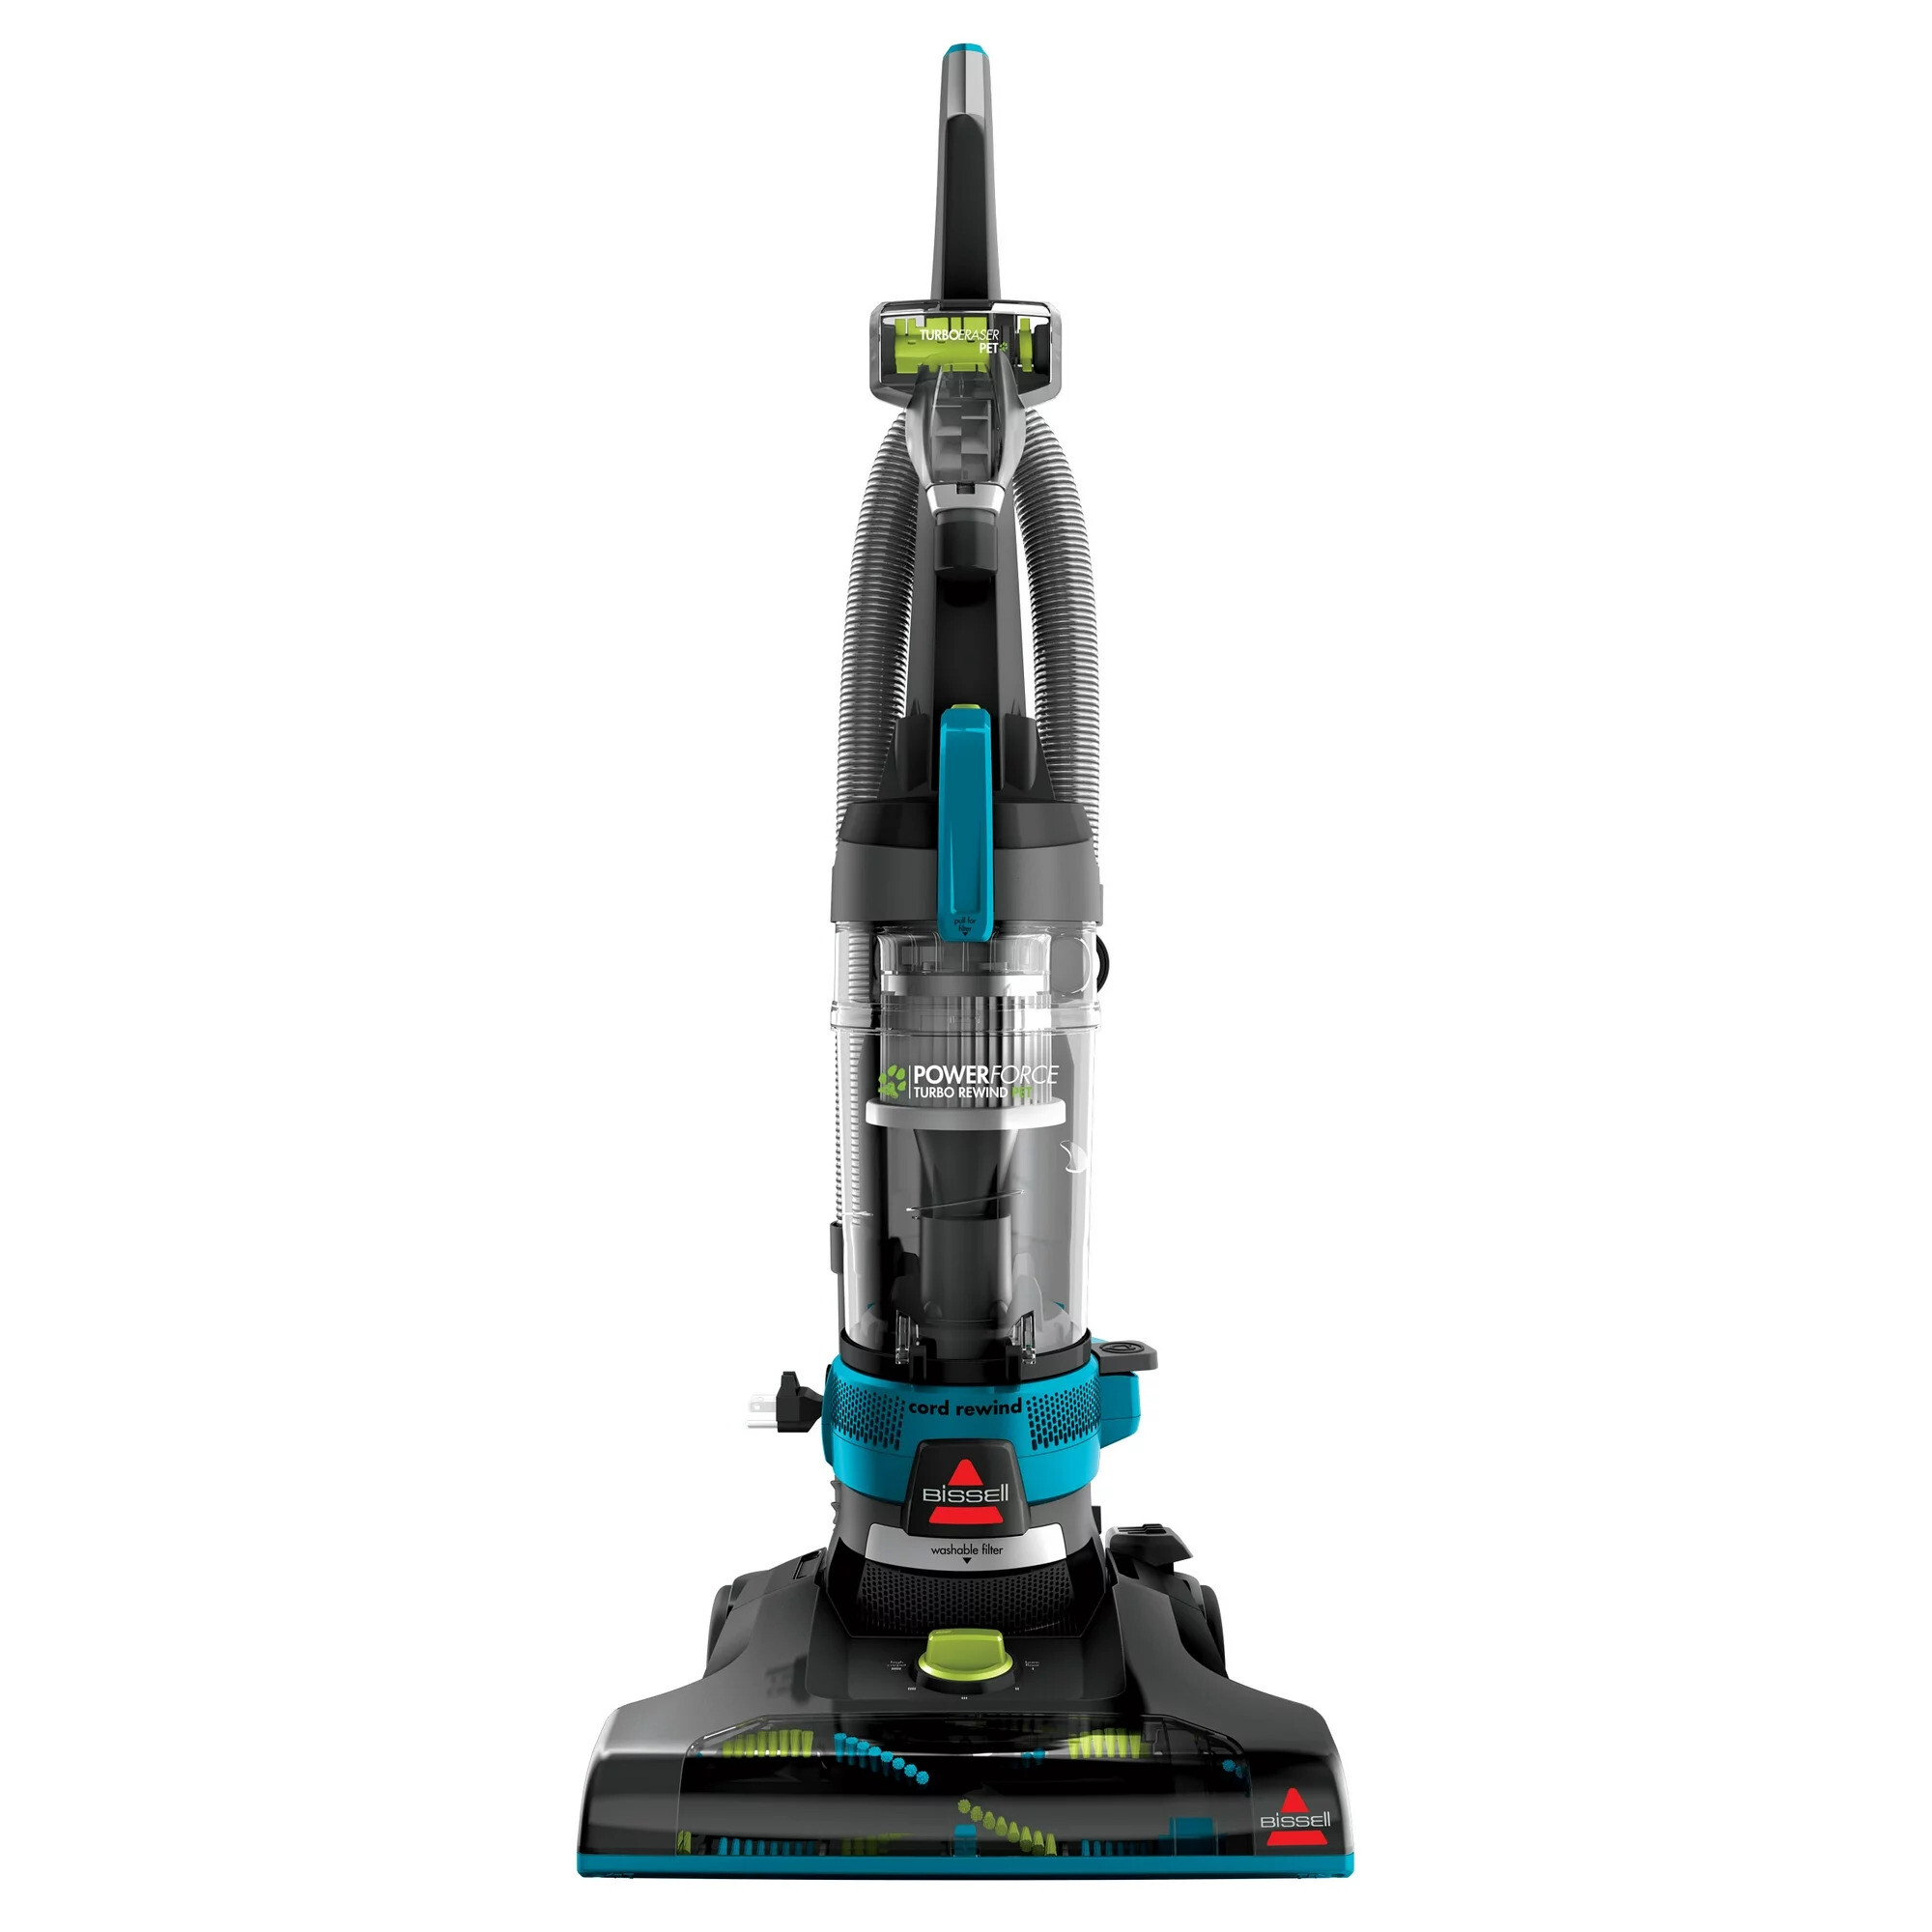 BISSELL Power Force Helix Turbo Rewind Pet Bagless Vacuum, 2692 - image 1 of 9